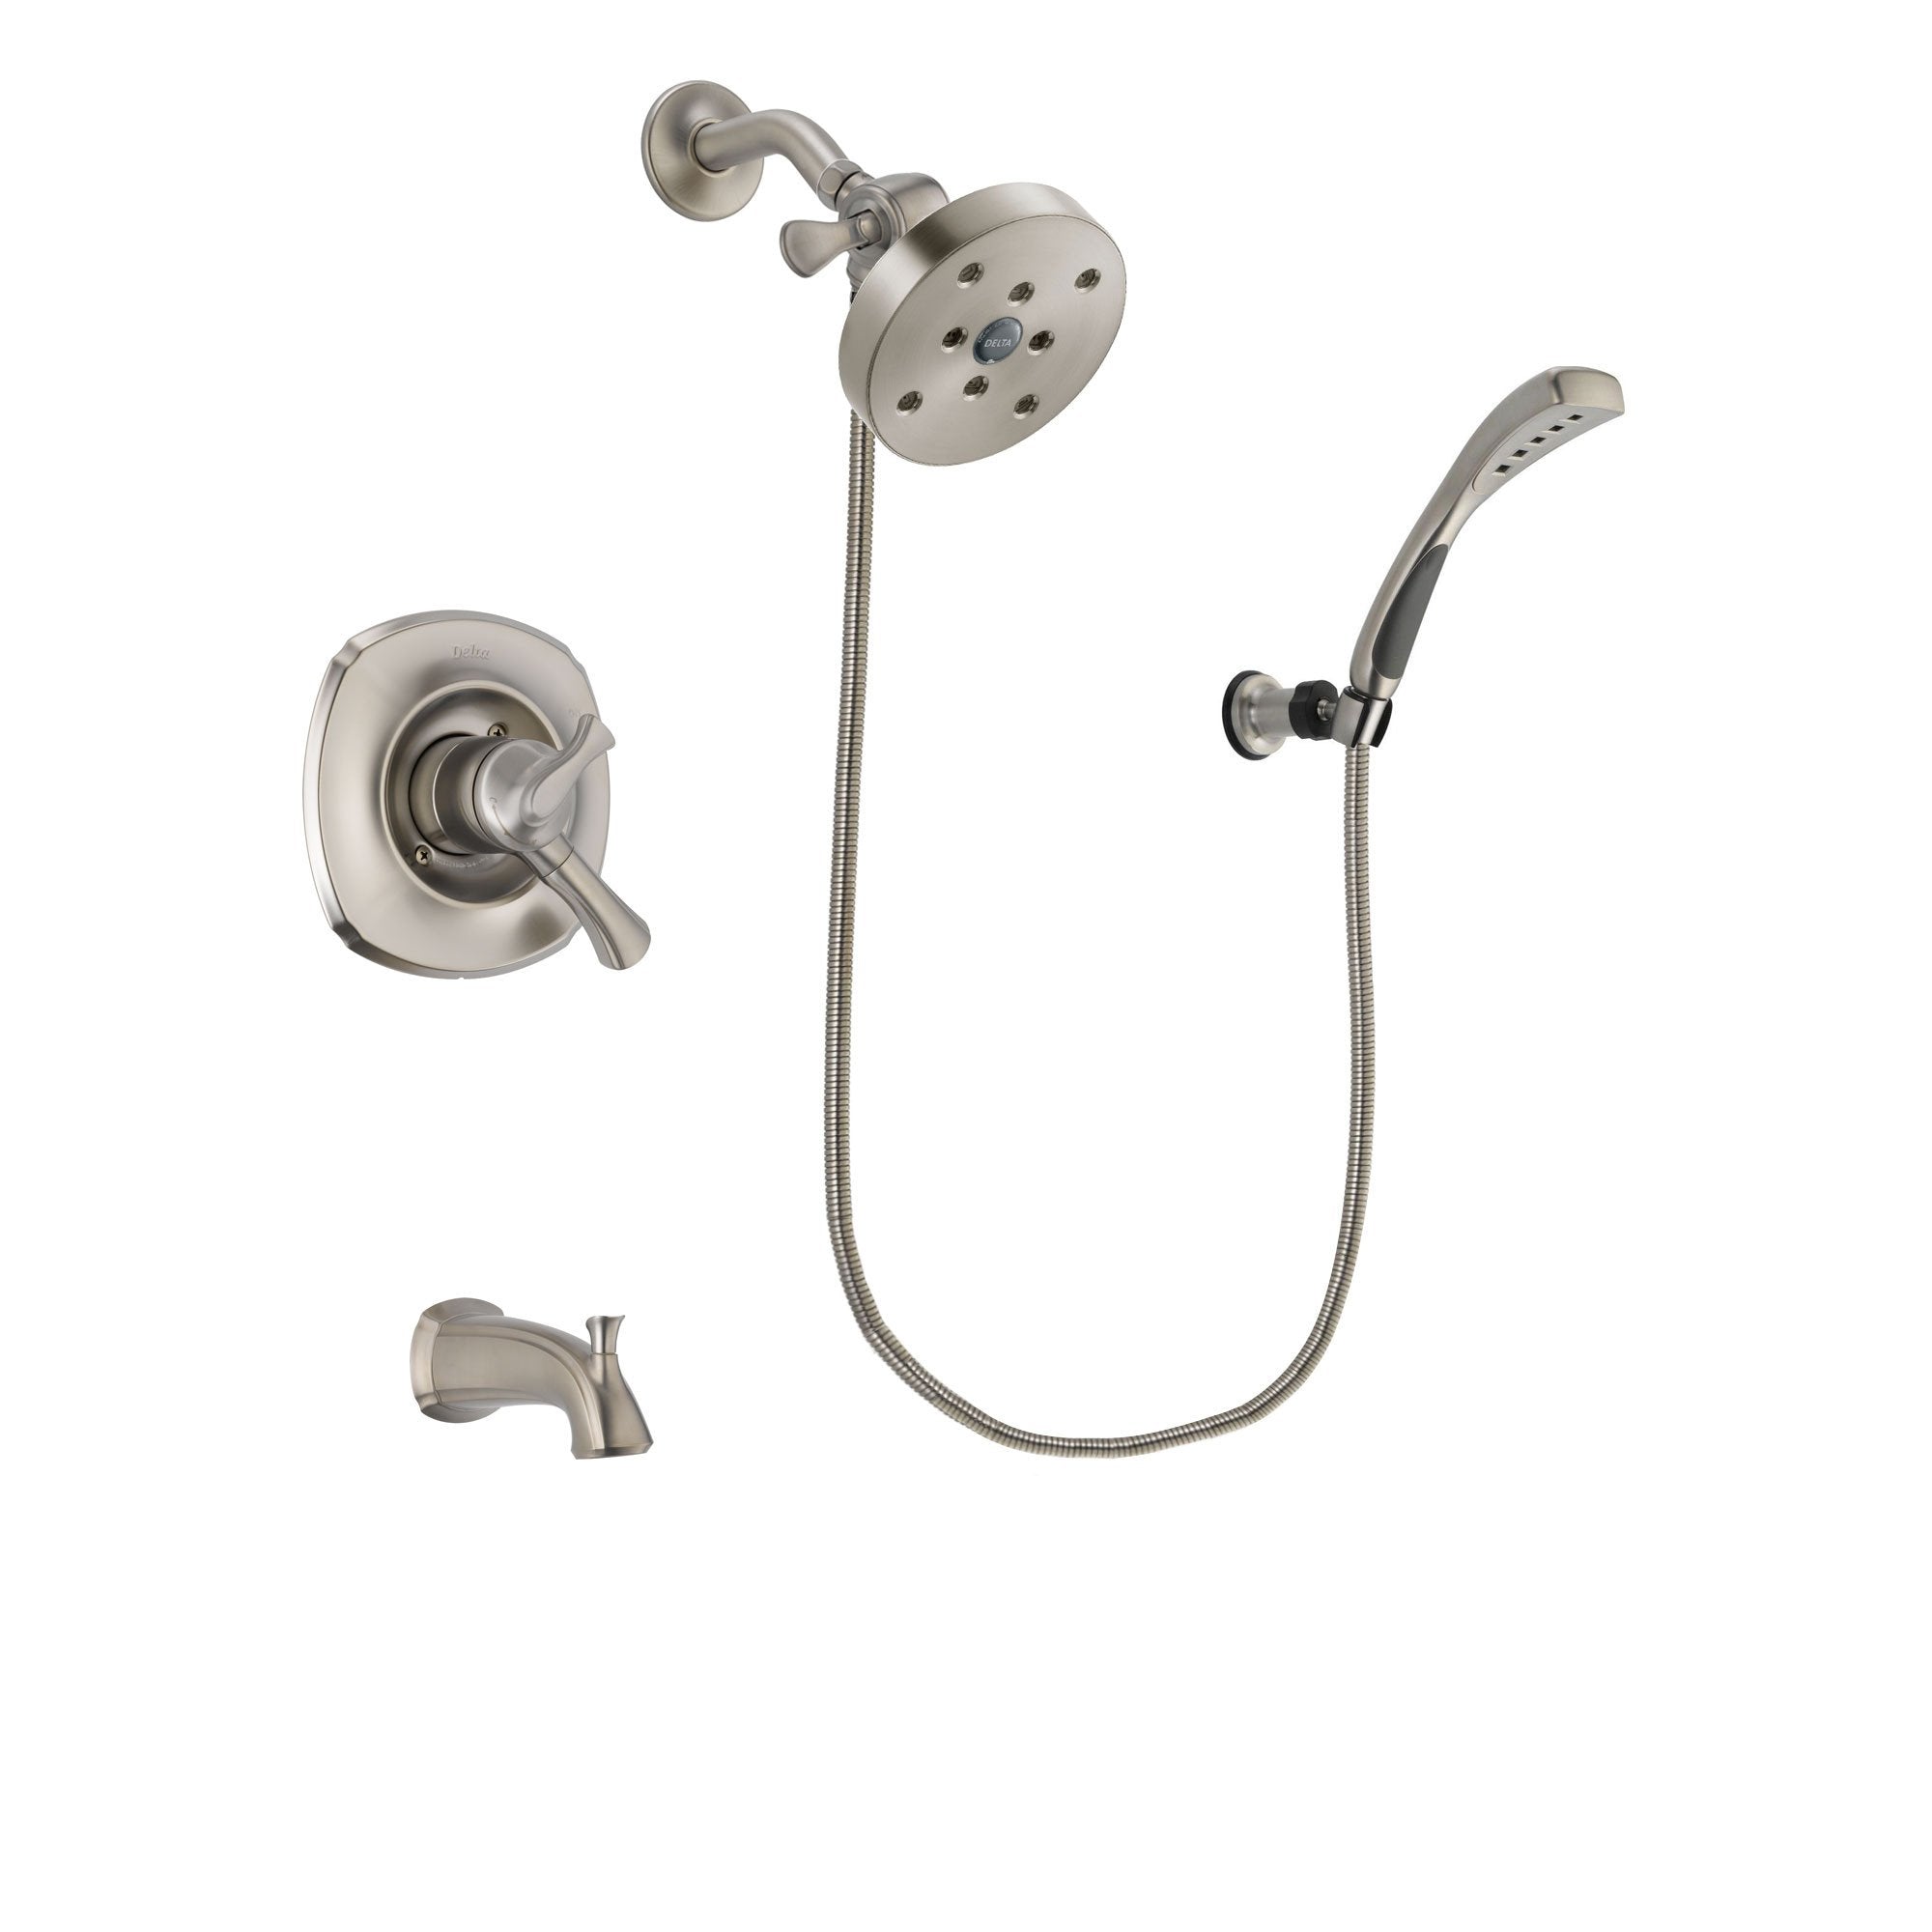 Delta Addison Stainless Steel Finish Dual Control Tub and Shower Faucet System Package with 5-1/2 inch Shower Head and Wall Mounted Handshower Includes Rough-in Valve and Tub Spout DSP1915V